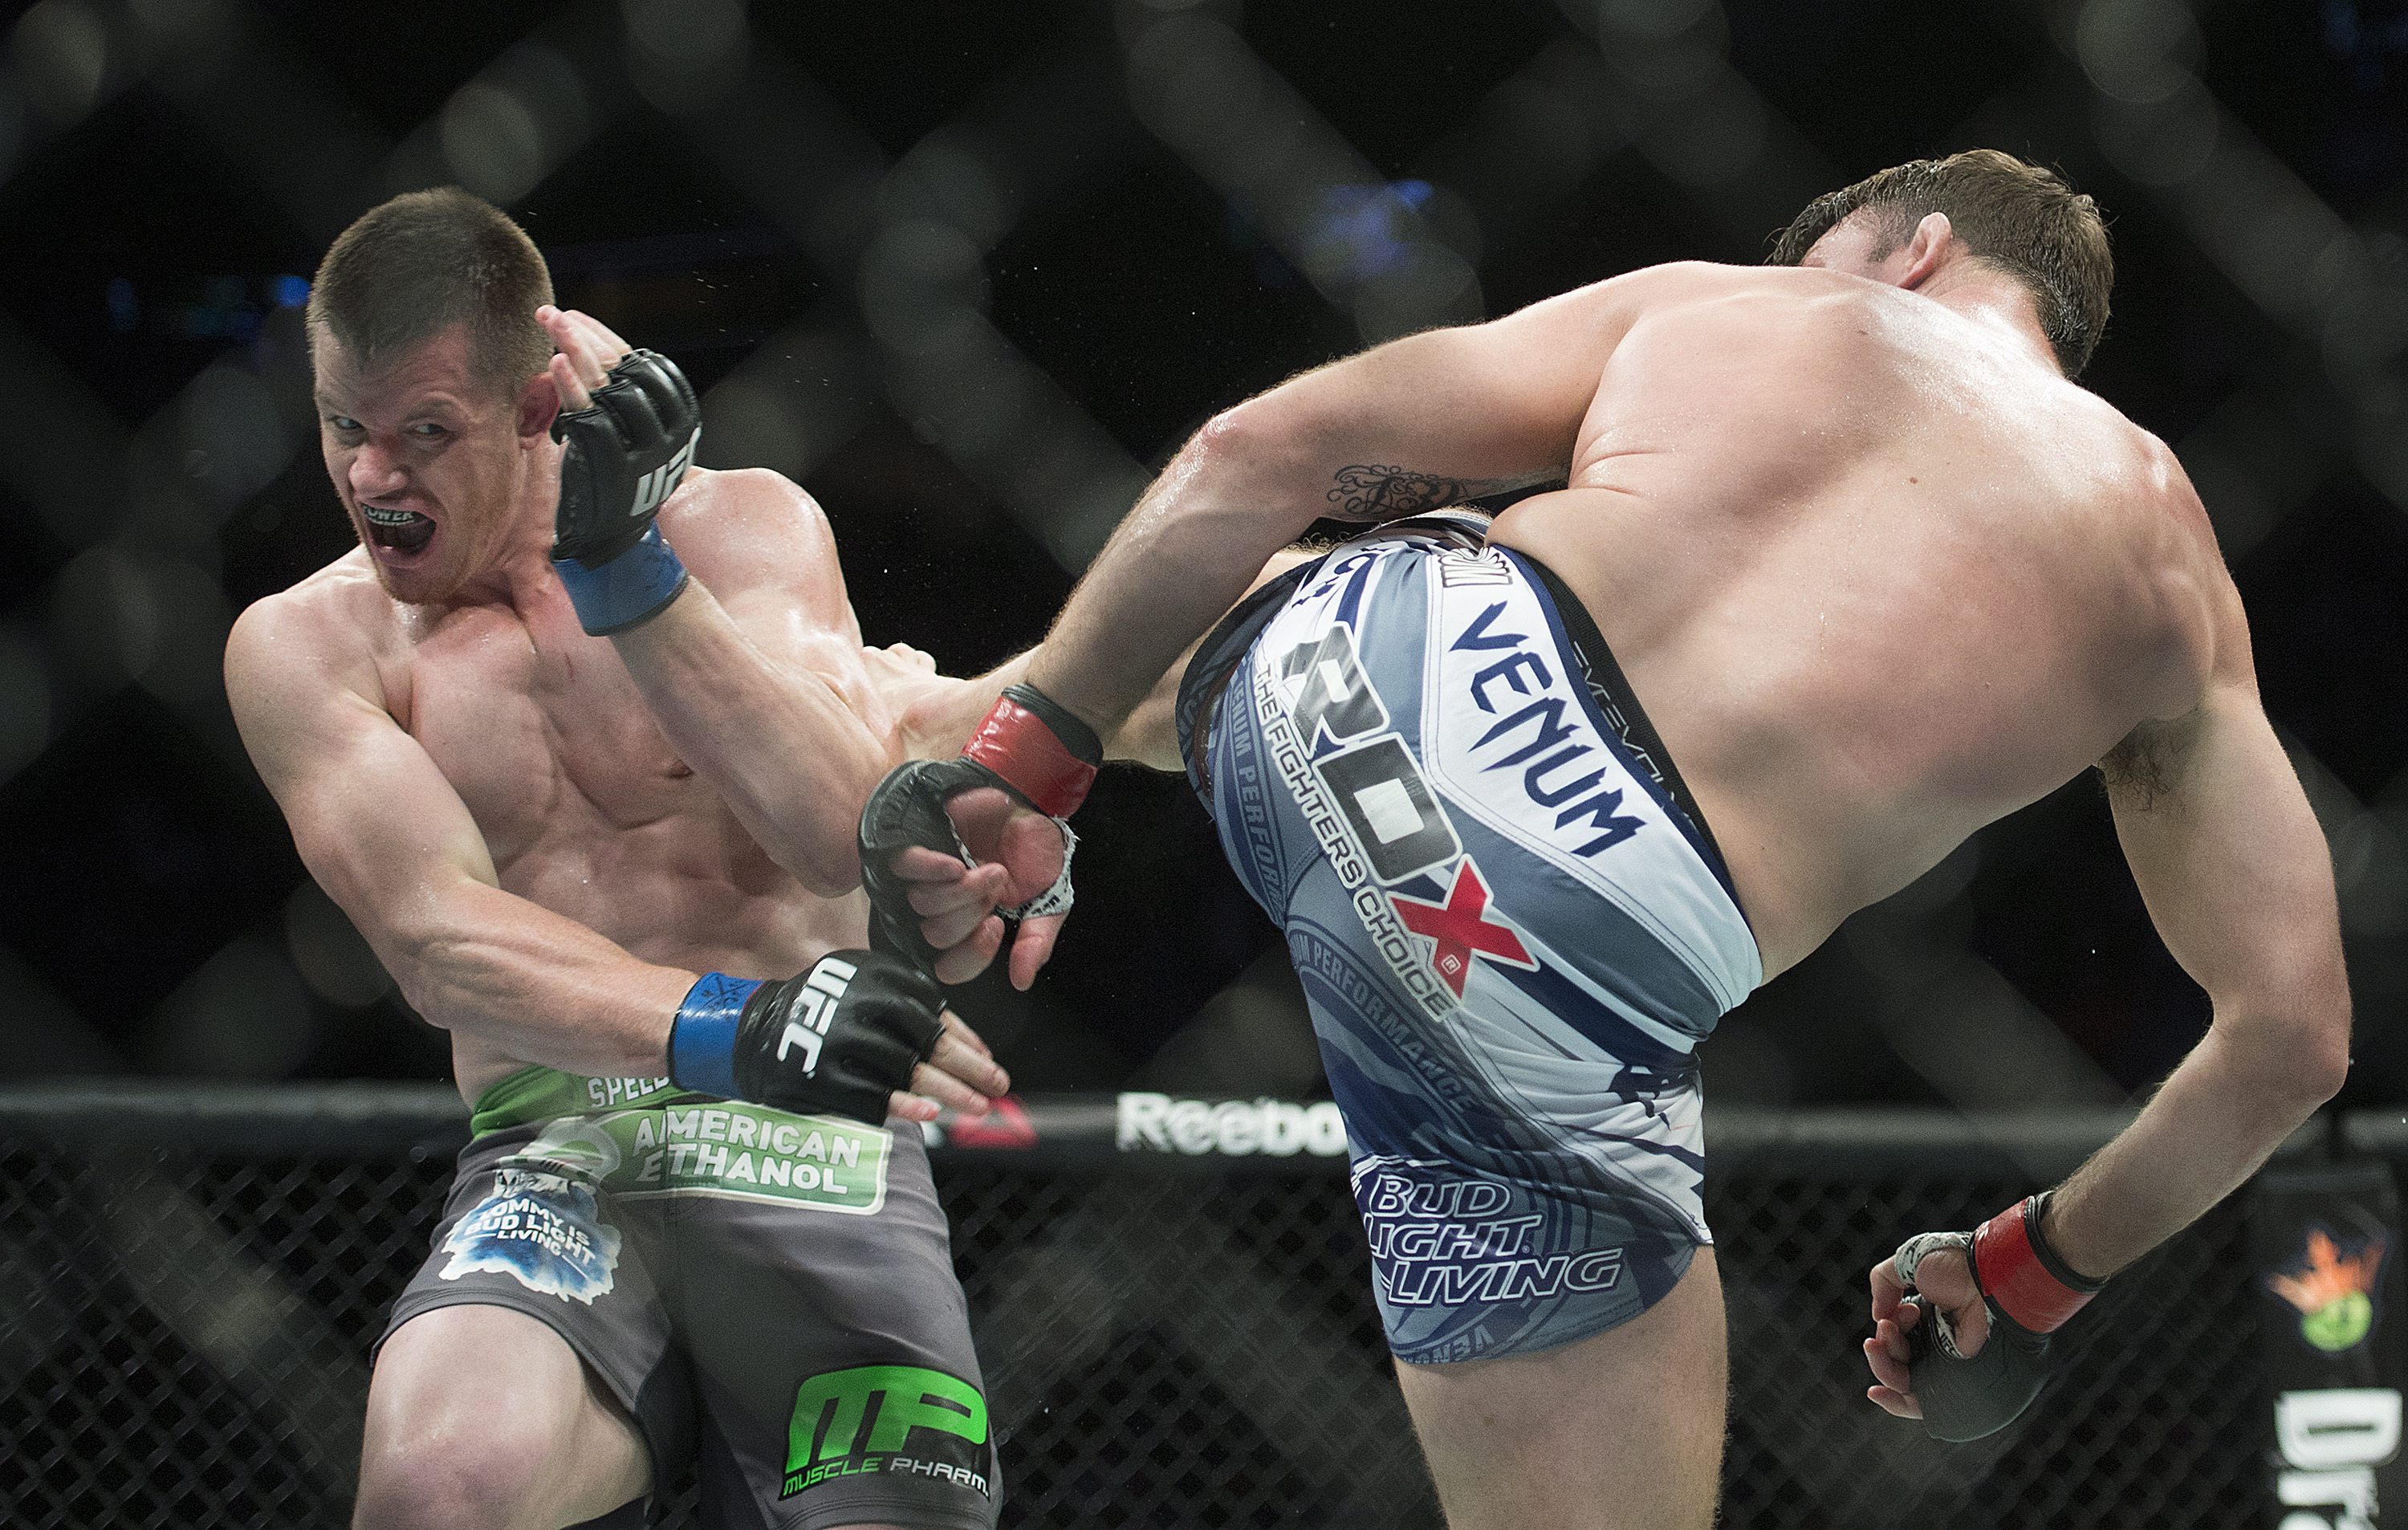 Michael Bisping (R) lands a kick to the body of CB Dollaway. (AP)